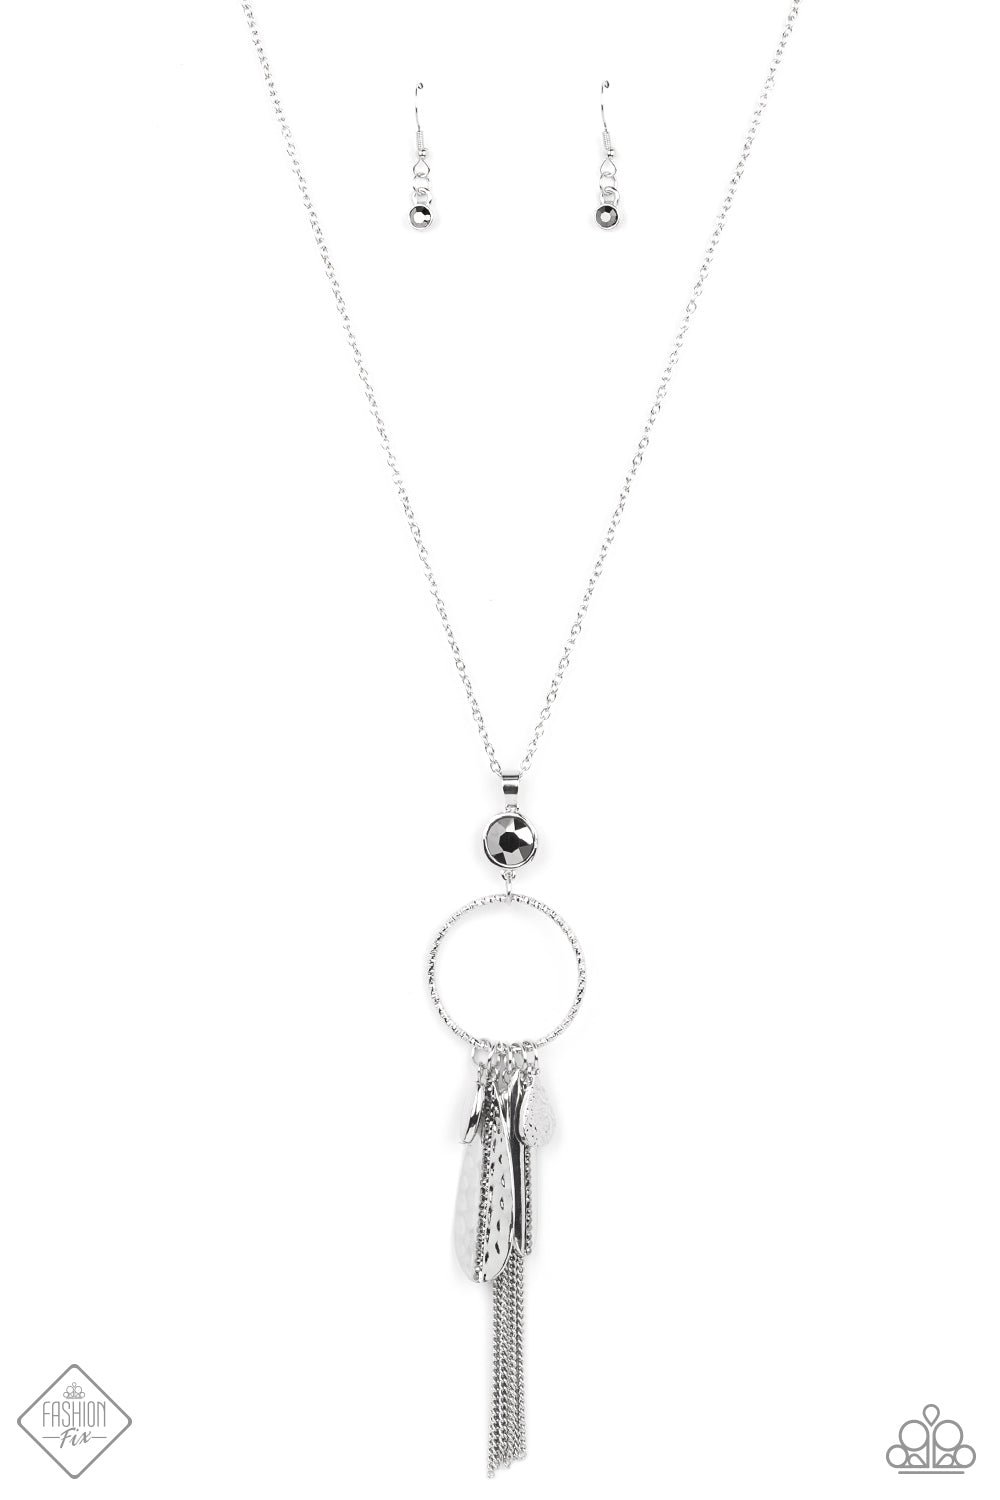 Tastefully Tasseled Silver Necklace - Paparazzi Accessories  Featuring both smooth and hammered finishes, dainty smoky rhinestones, and a tassel of dainty chains, a sassy collection of silver charms swings from the bottom of a brightly textured circle. A faceted hematite gem sits atop the harmoniously audacious display at the bottom of a lengthened dainty silver chain for a crowning finish. Features an adjustable clasp closure.  Sold as one individual necklace. Includes one pair of matching earrings.